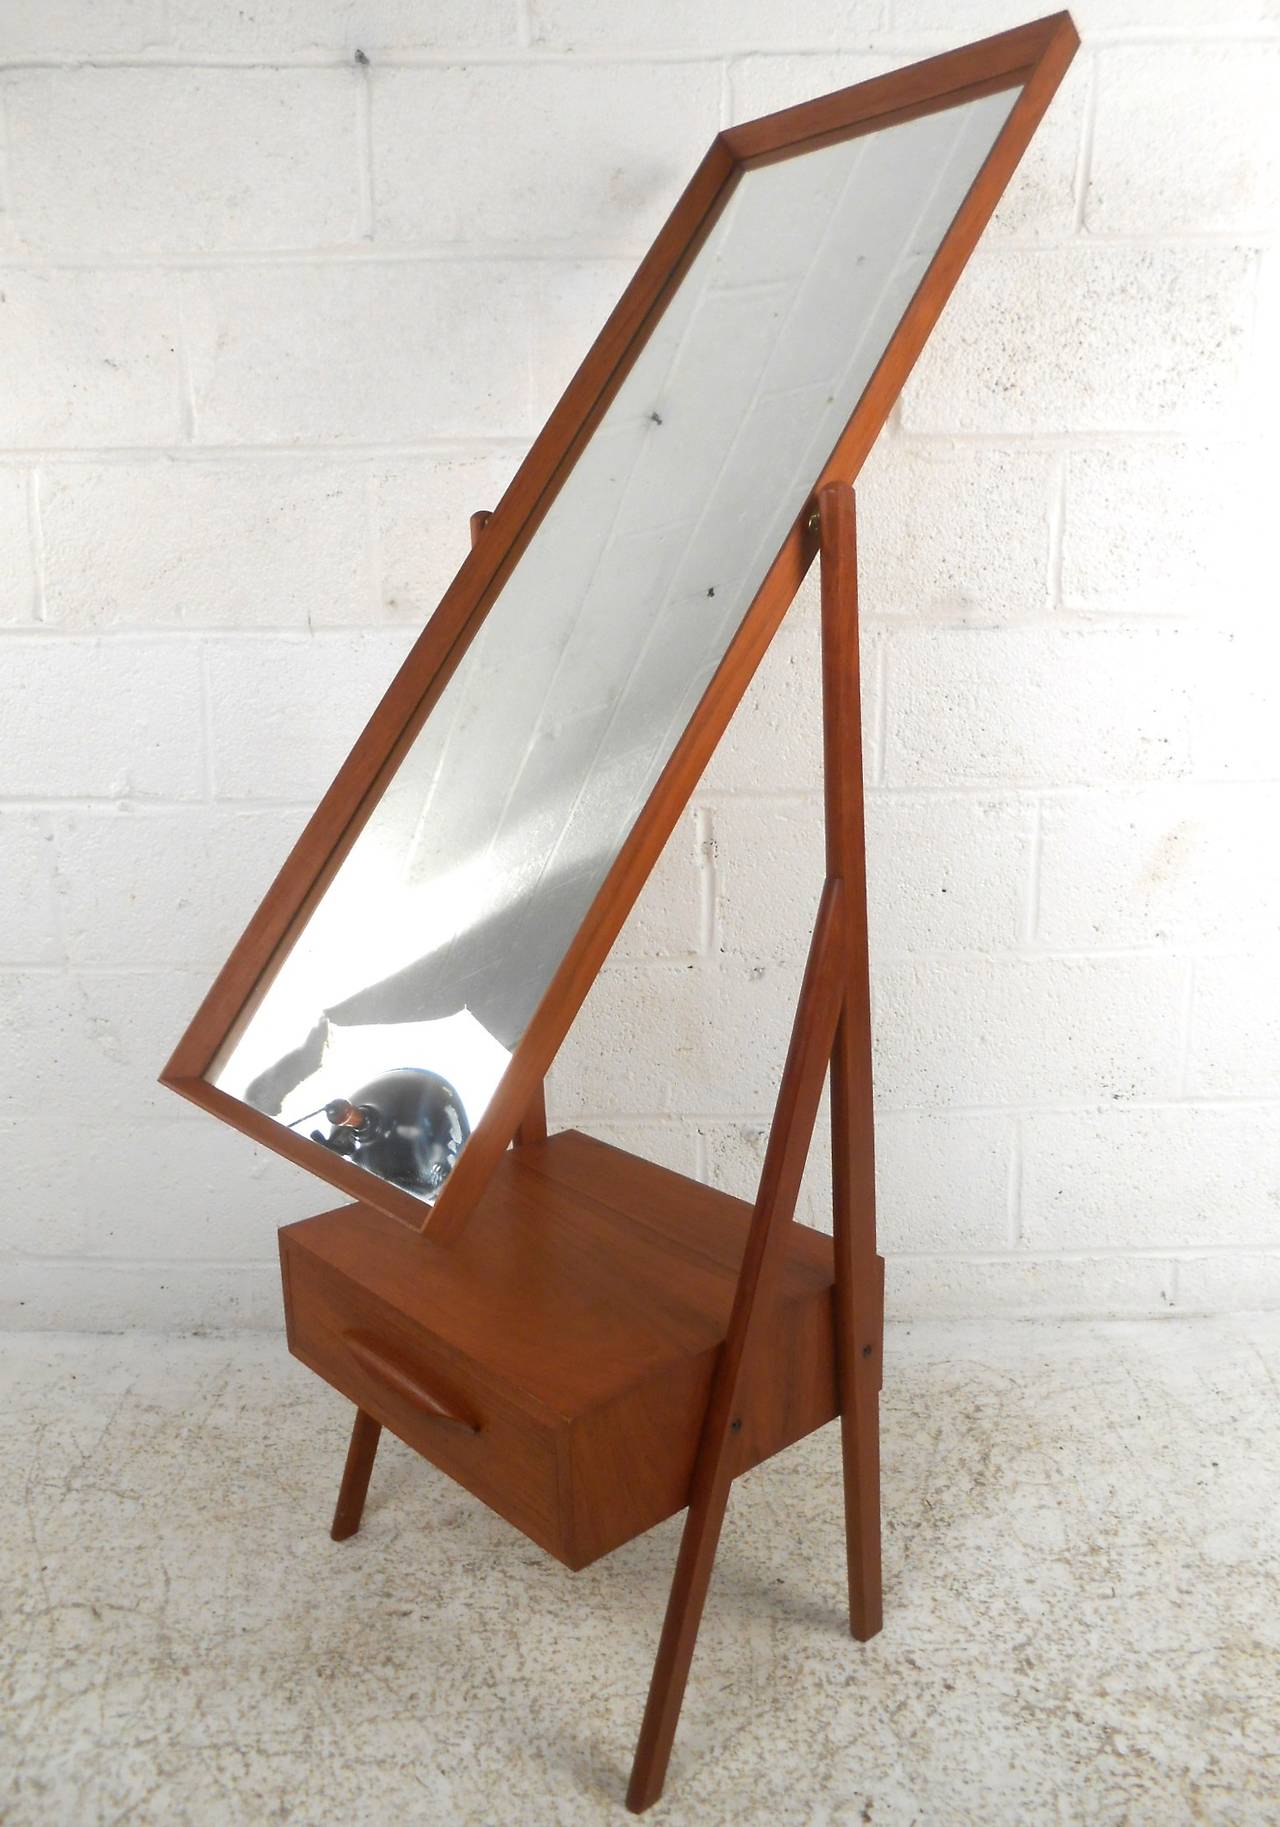 This wonderful Danish made teak dressing mirror features a single drawer for storage and a tilting swivel mirror. Elegant in it's minimal design, this unit will easily compliment both a residential or retail application.  Please confirm item